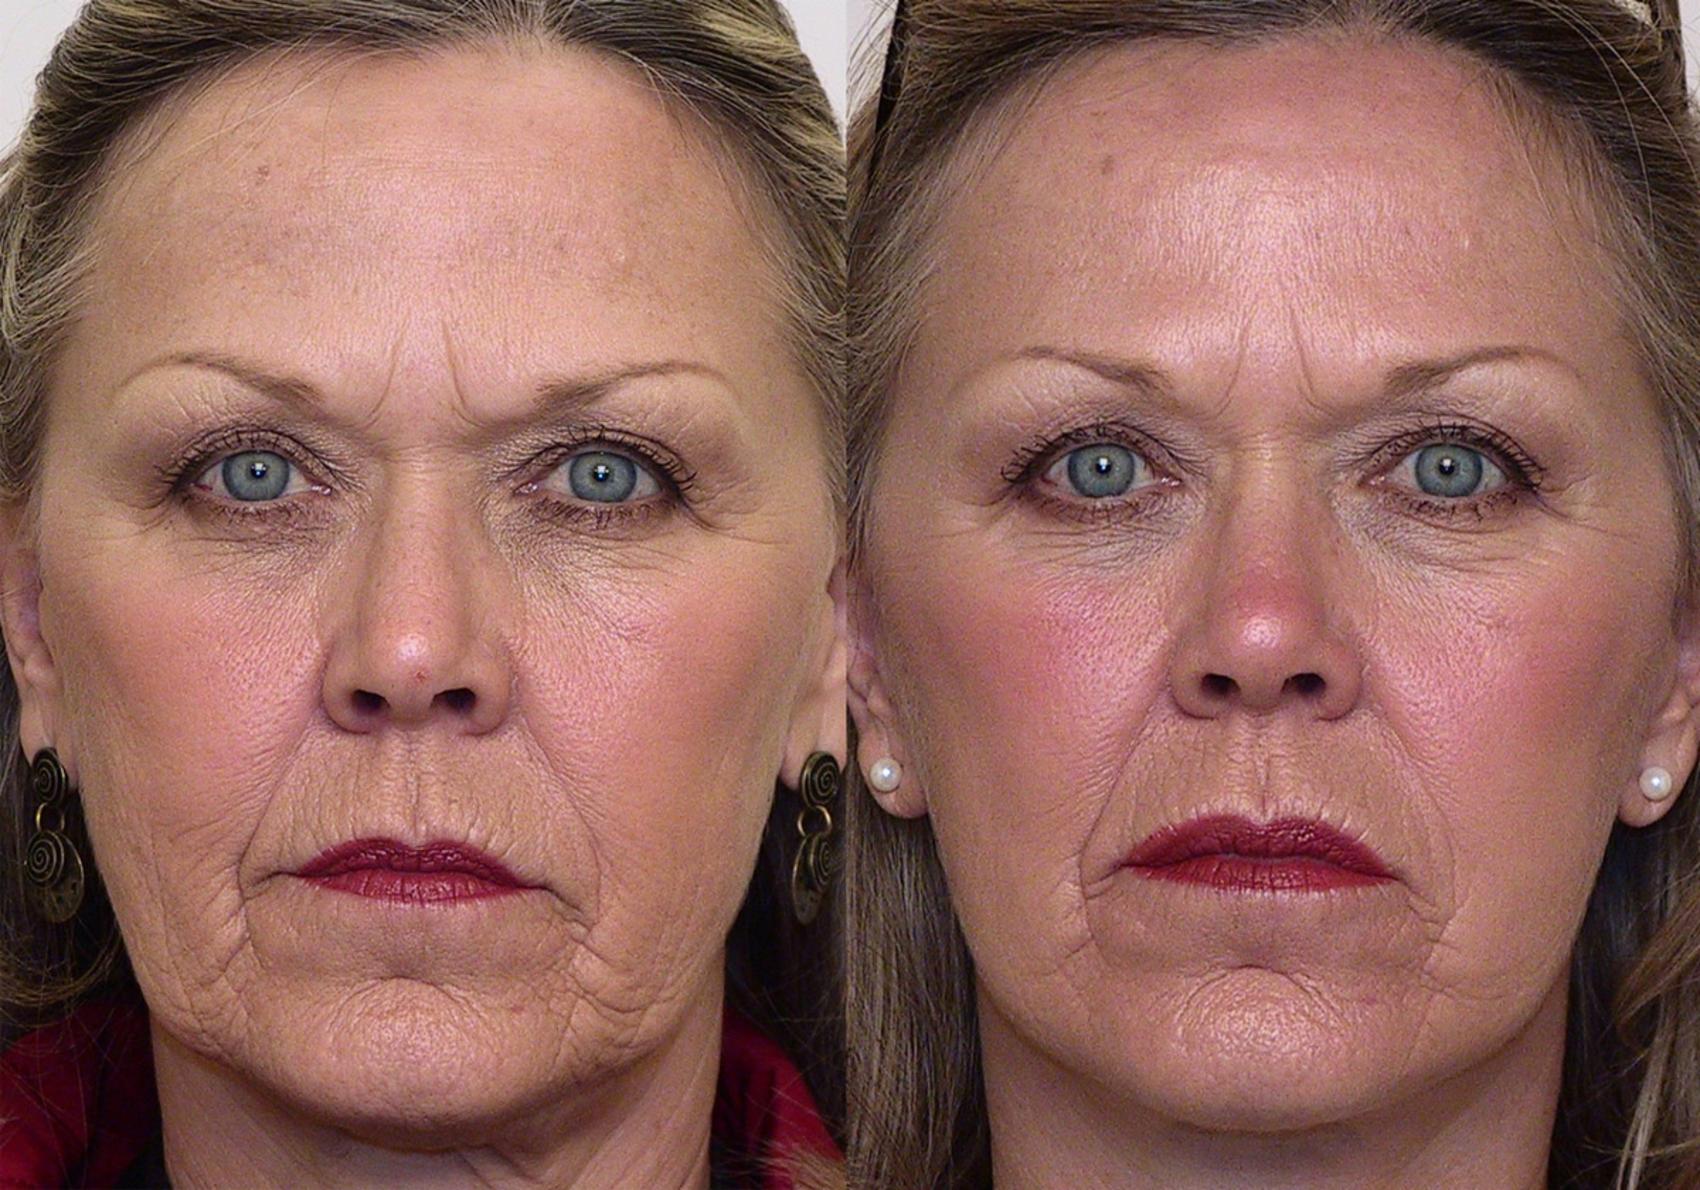 Natural Looking Face and Neck Lift Results A natural looking face and neck  lift result is one where there are no obvious or telling signs that any  'work' has been done.